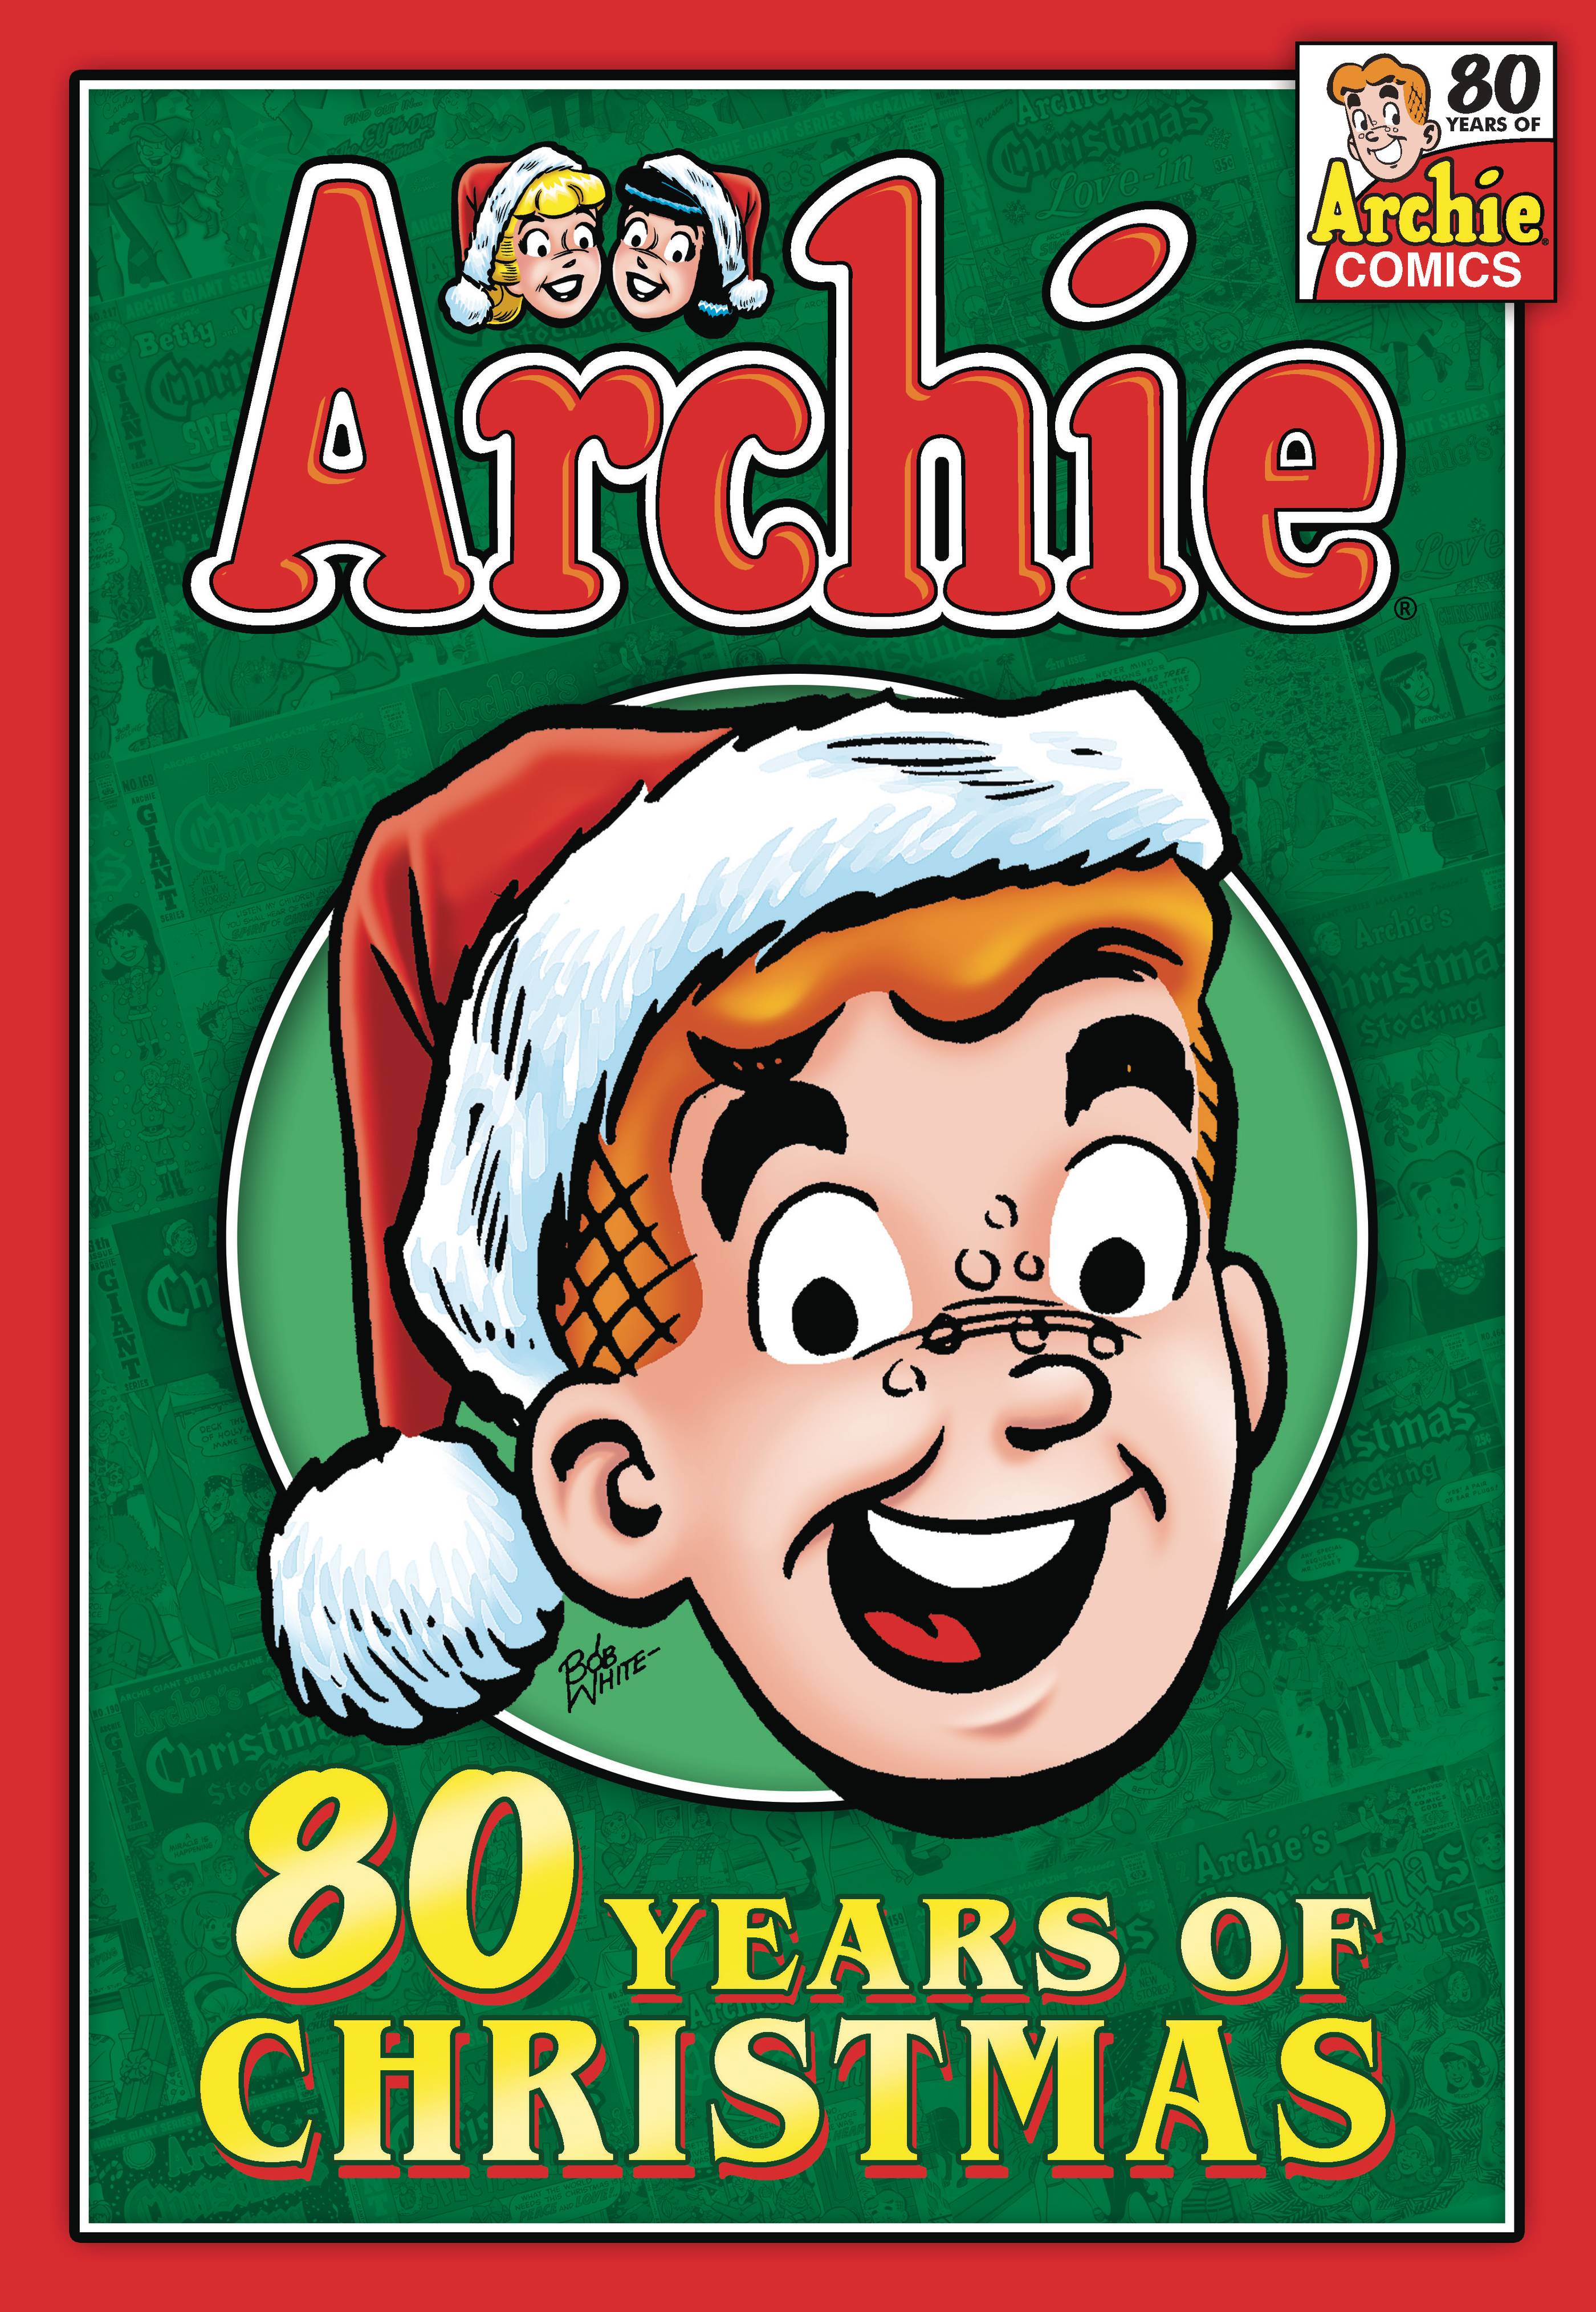 ARCHIE 80 YEARS OF CHRISTMAS TP (JUL211337)